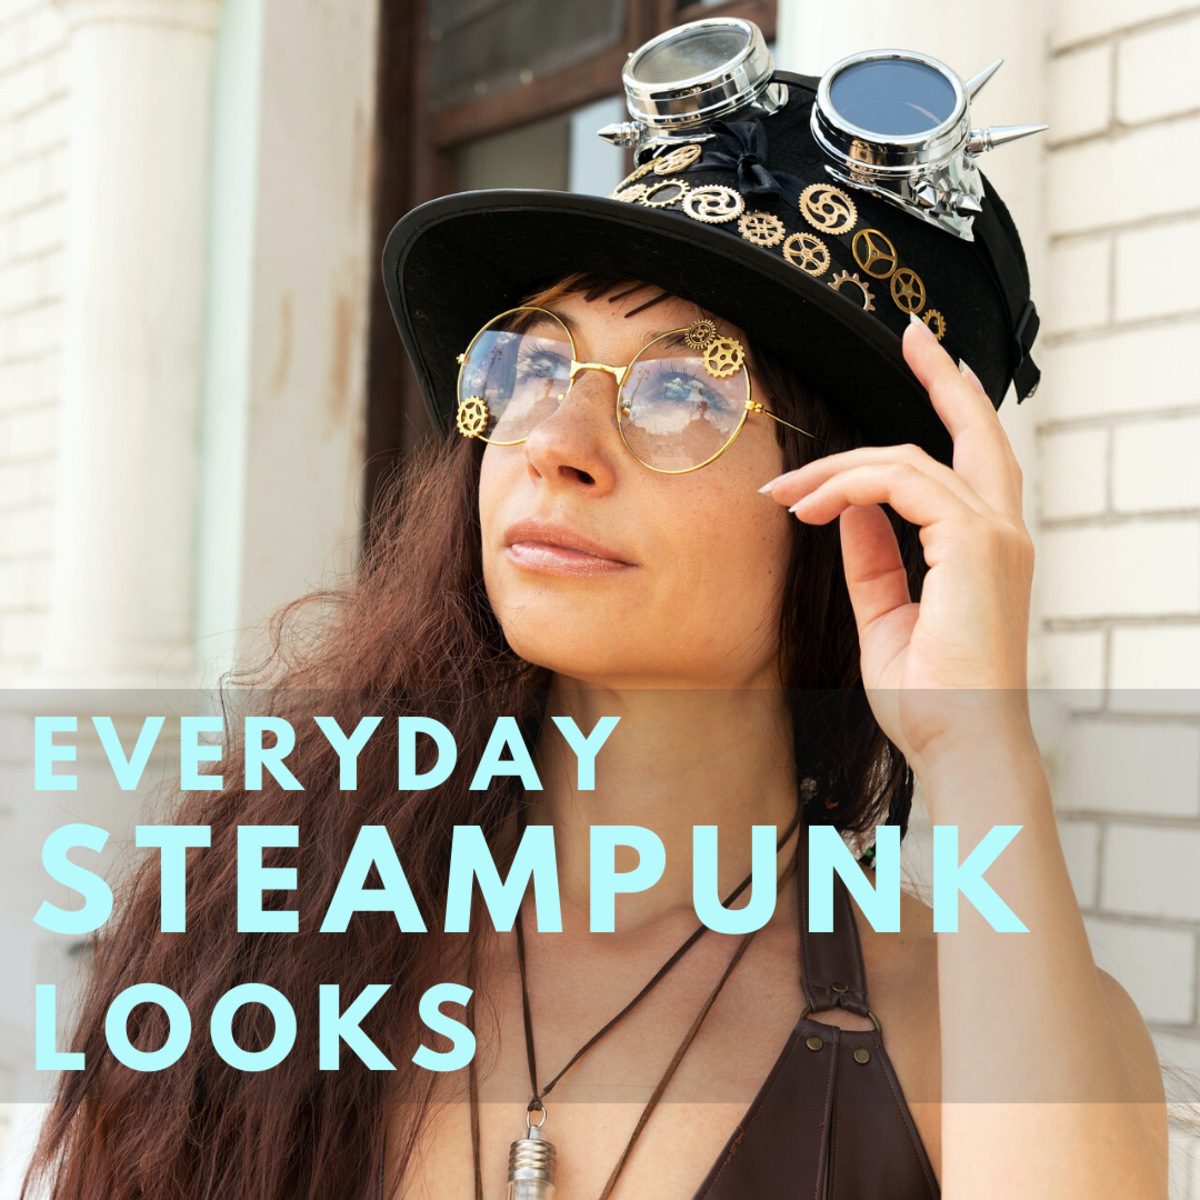 Add a little steampunk to your everyday style.